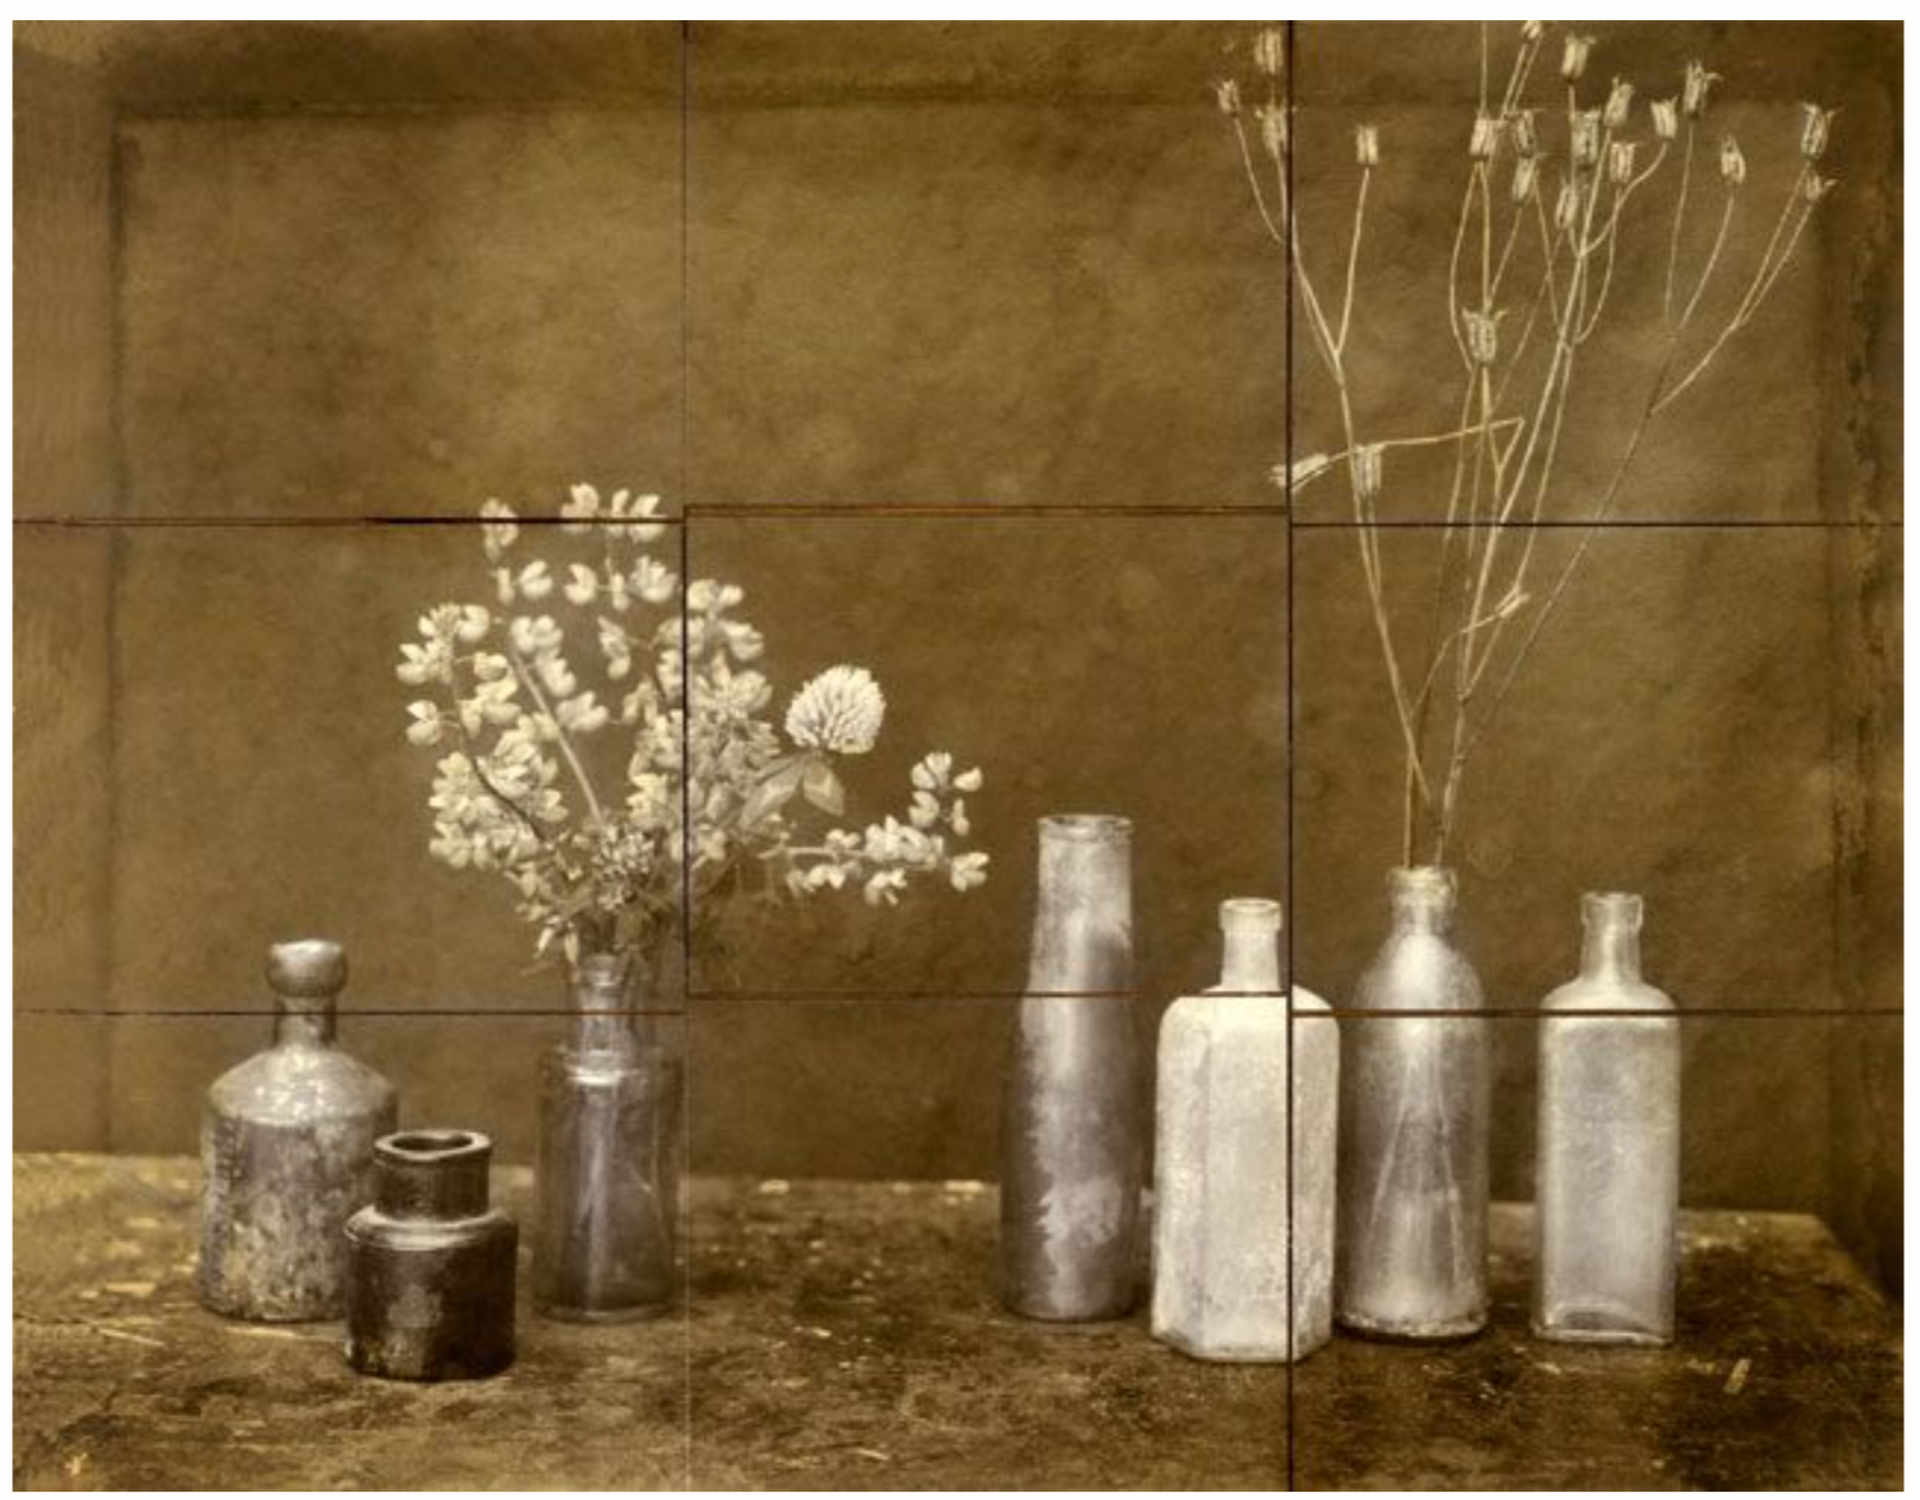 Still Life with Bottles (Grid) by Jan Gauthier